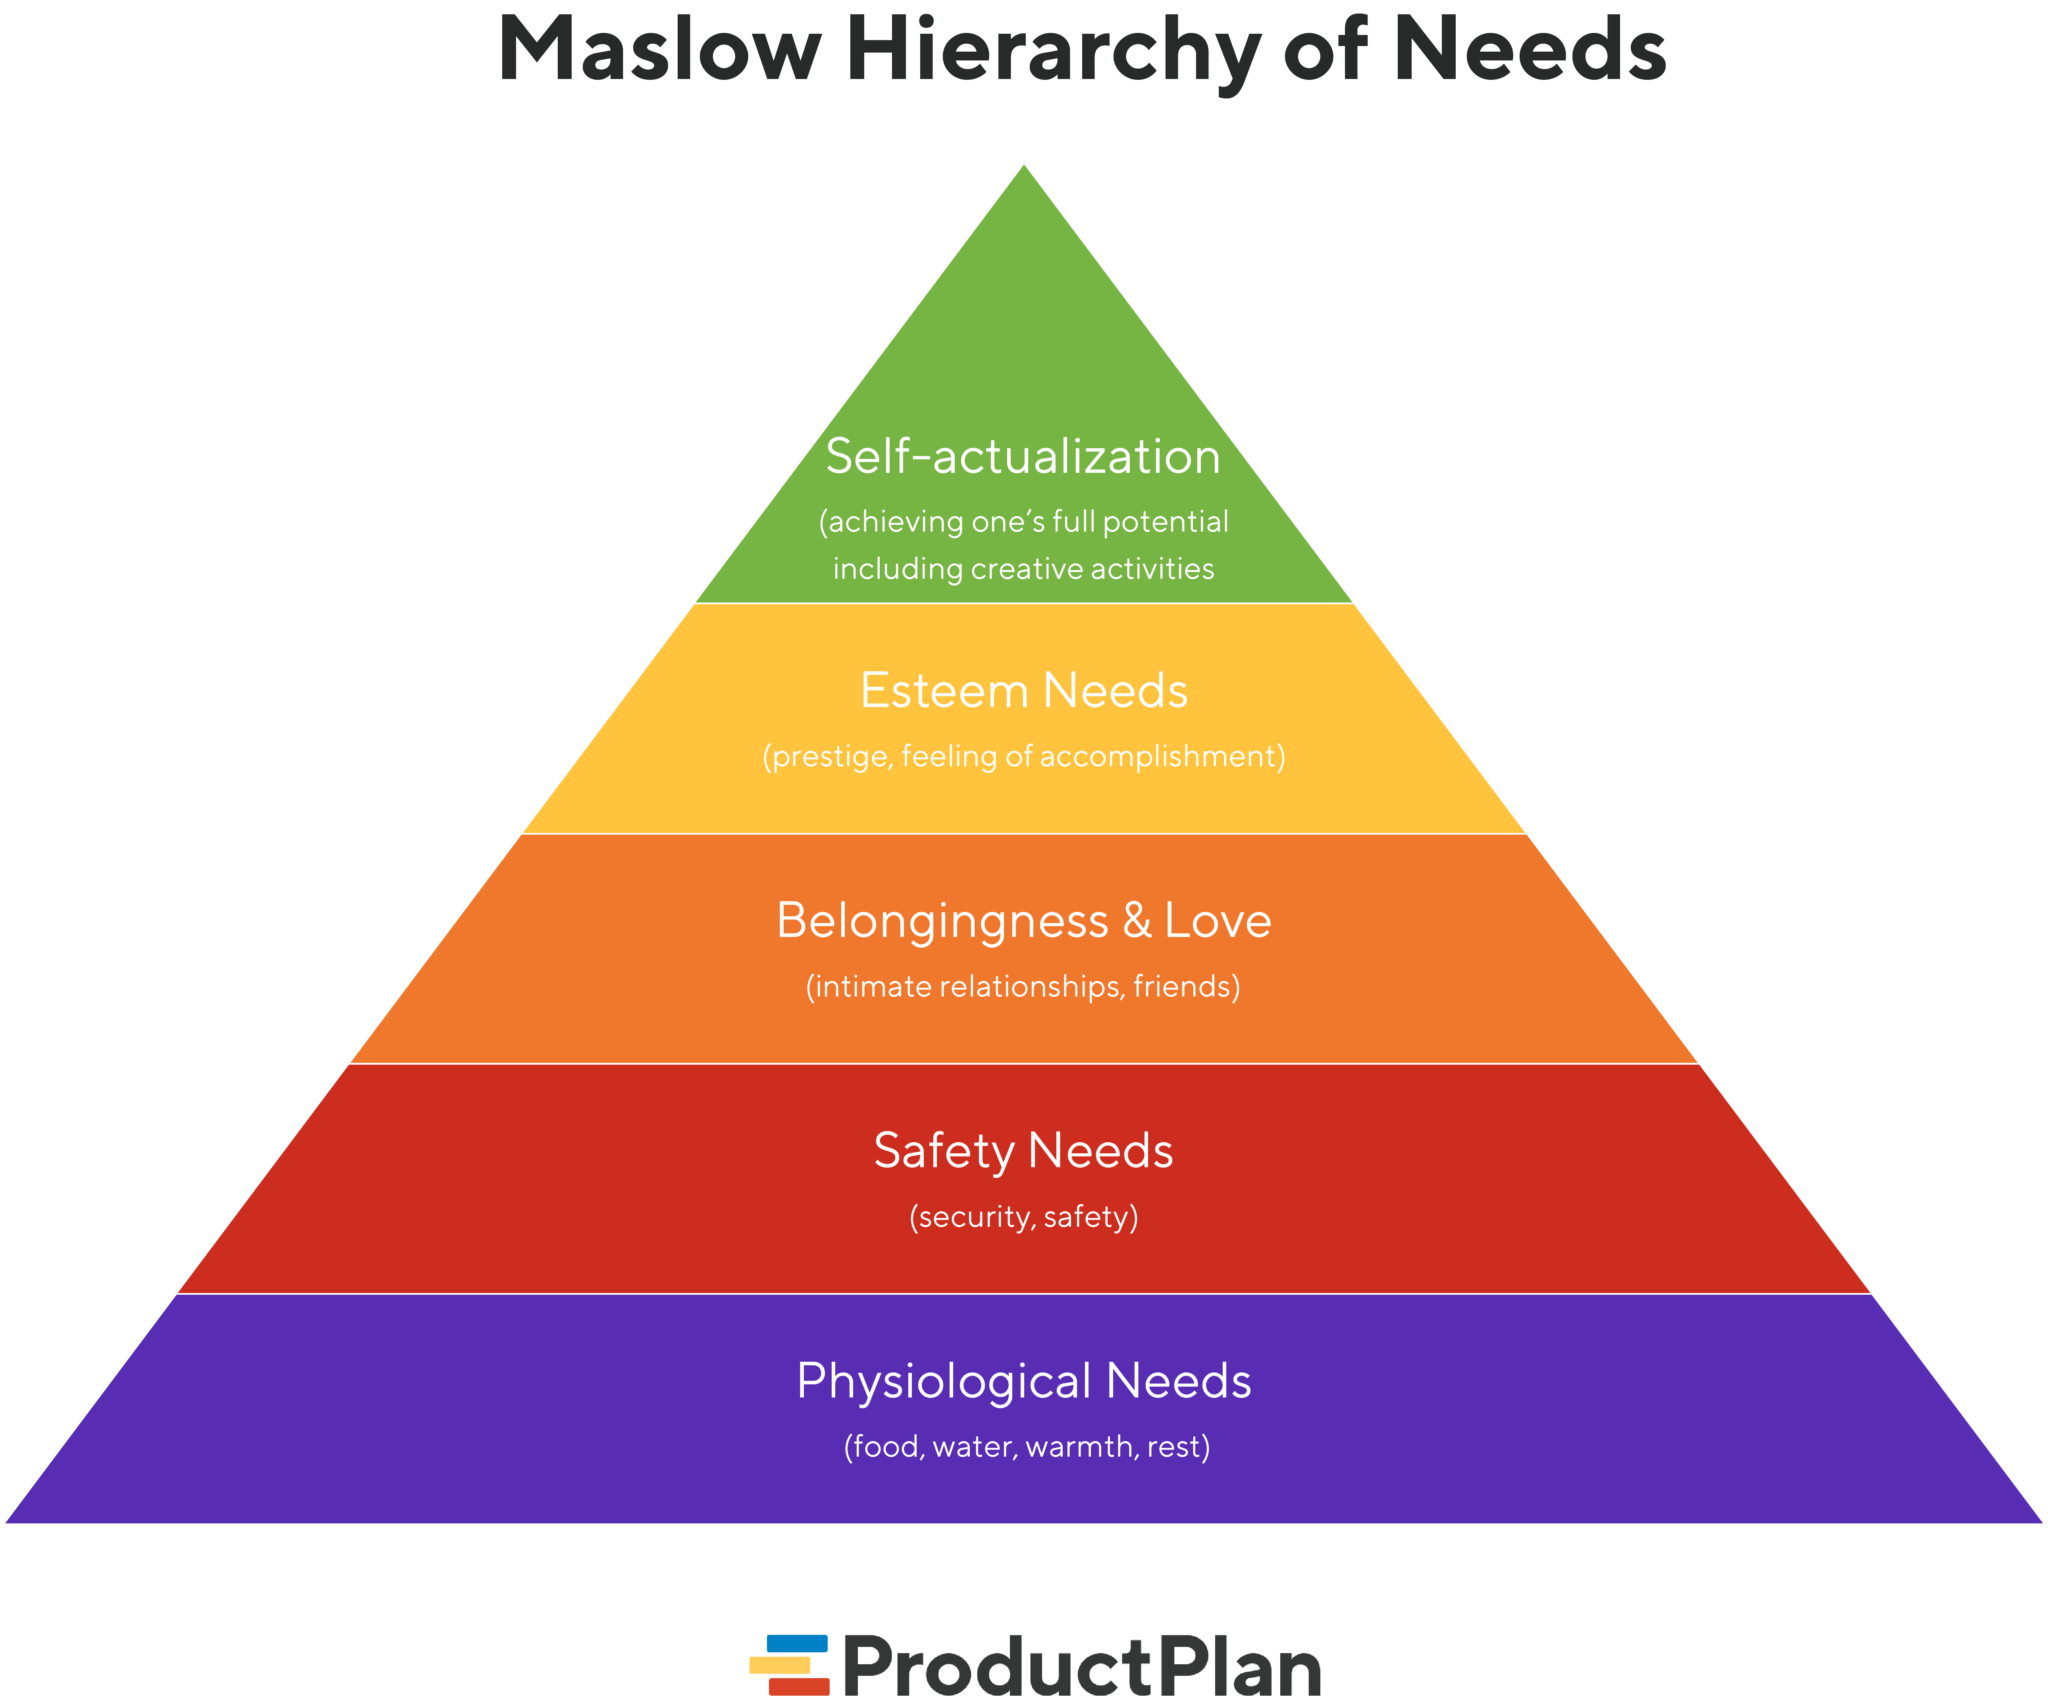 Maslows Hierarchy Of Needs Definition